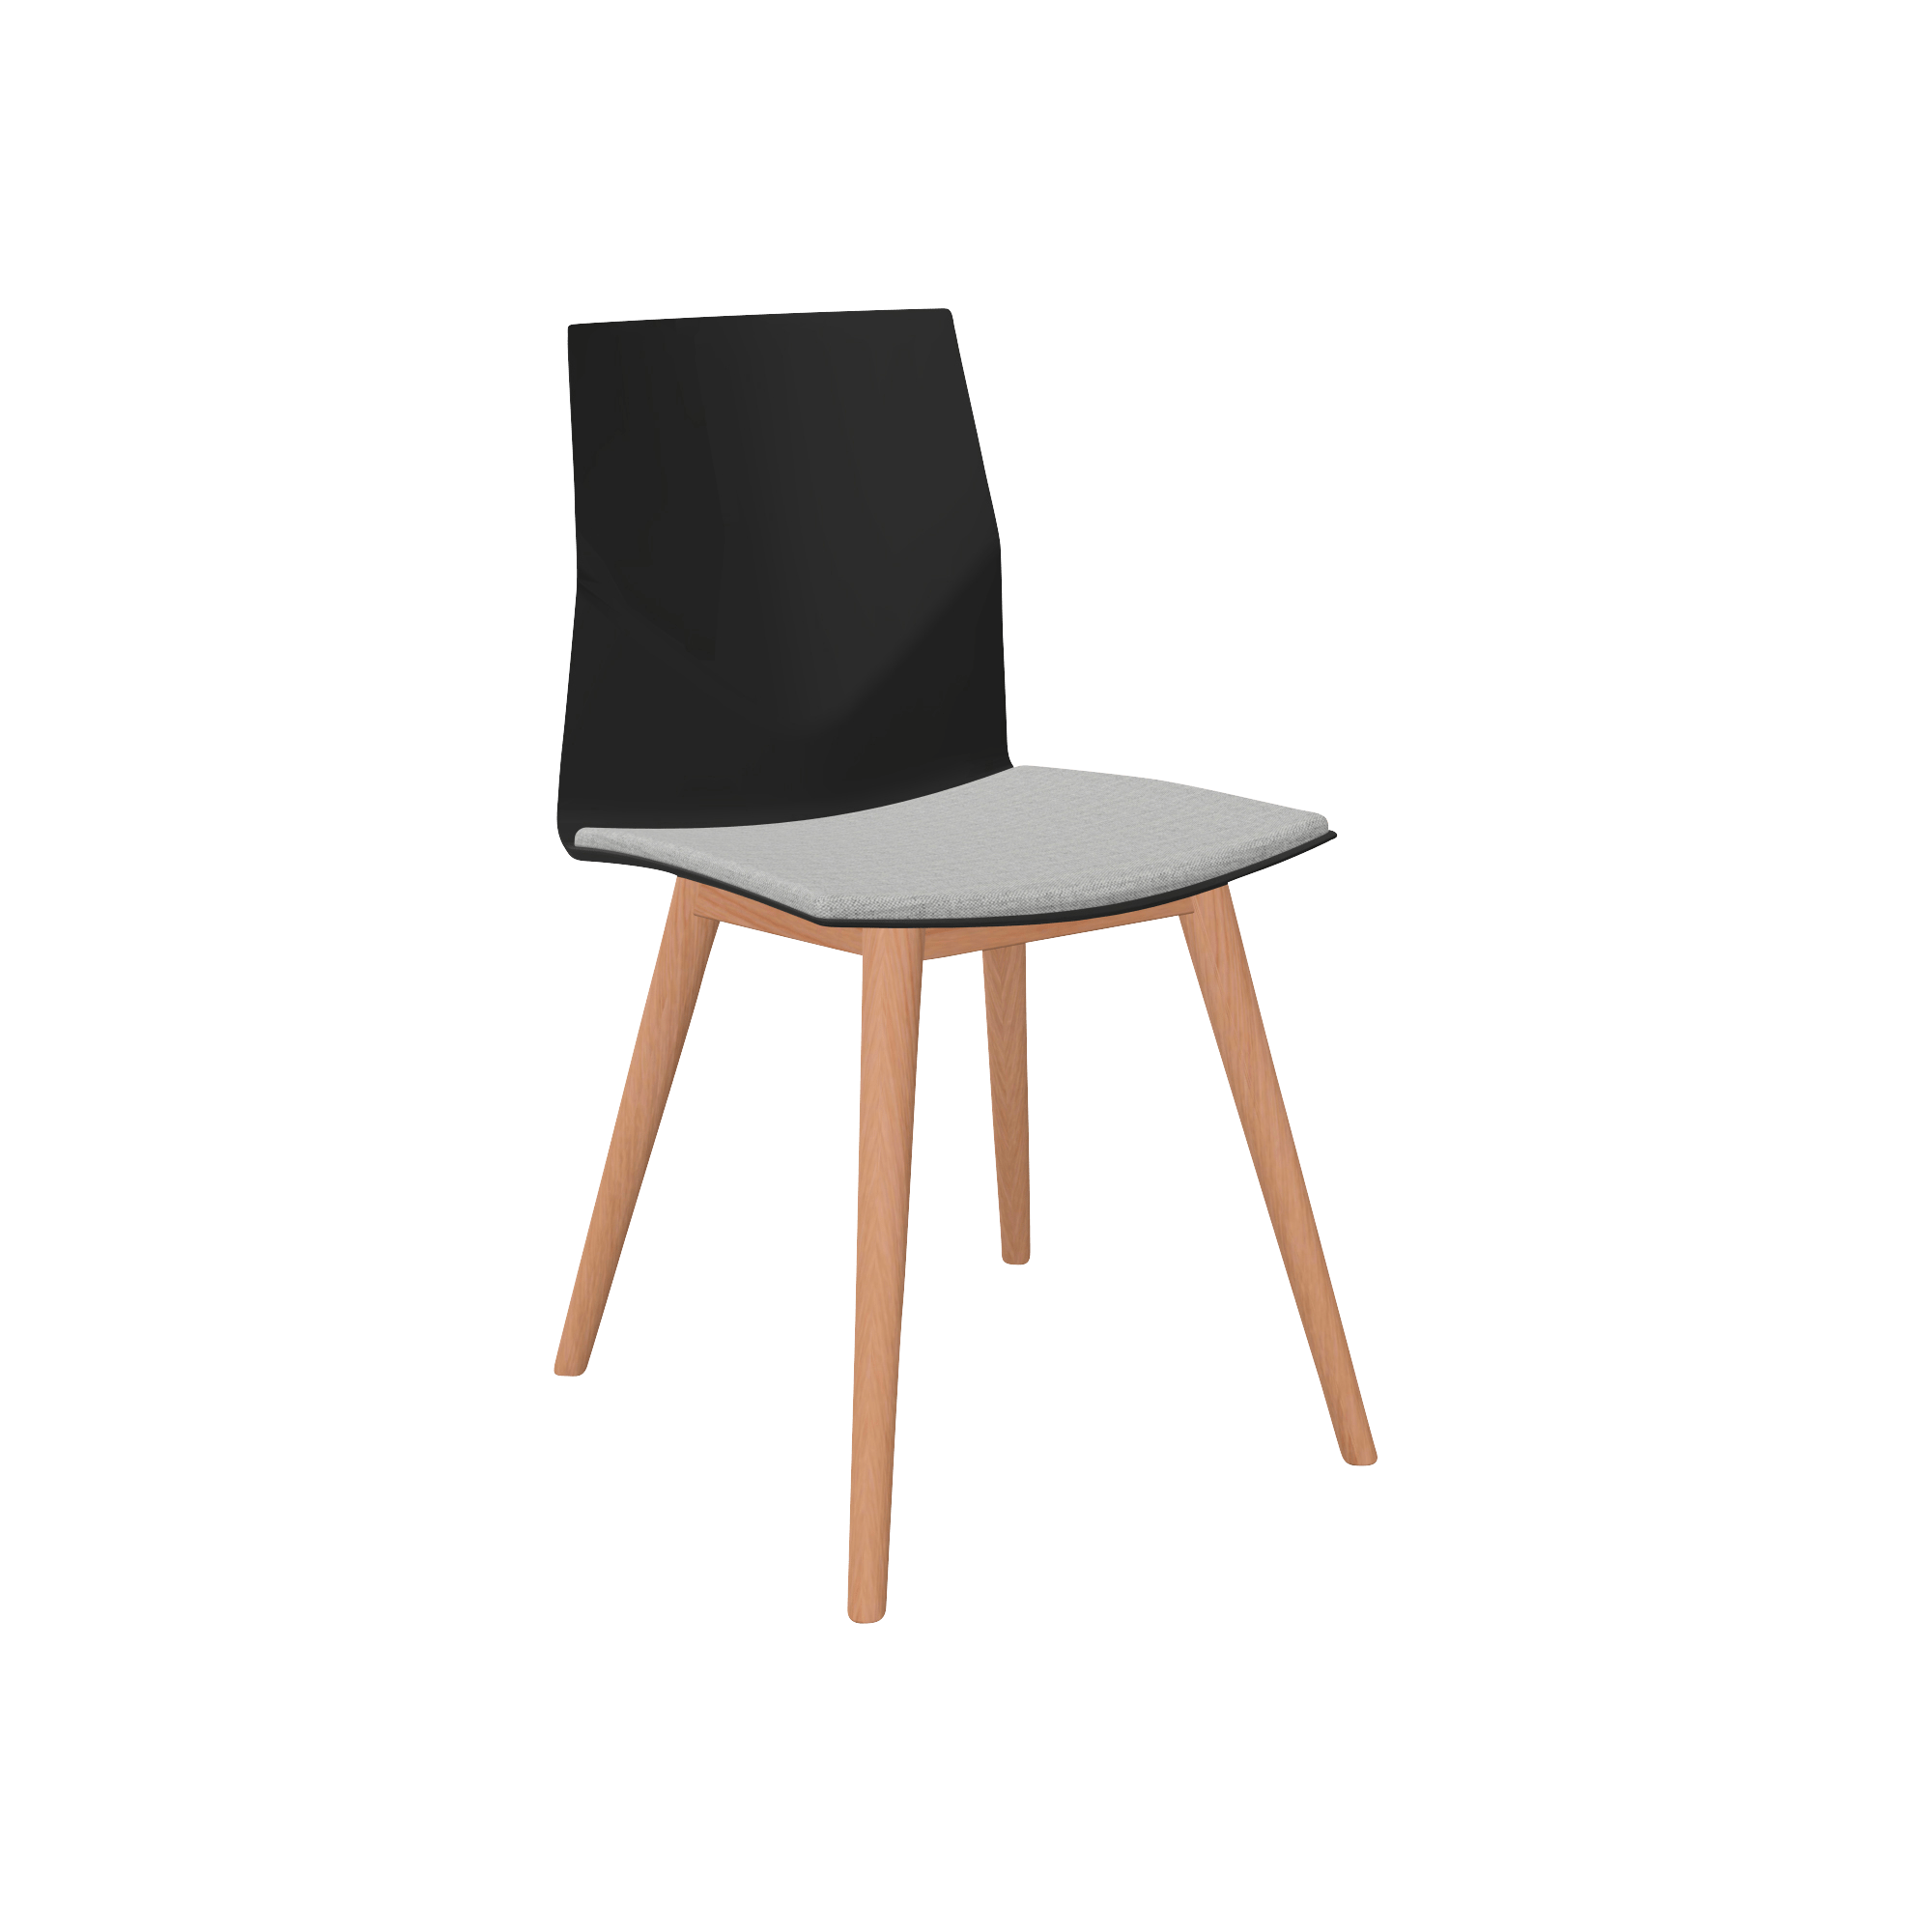 black chair with grey seat and wooden legs